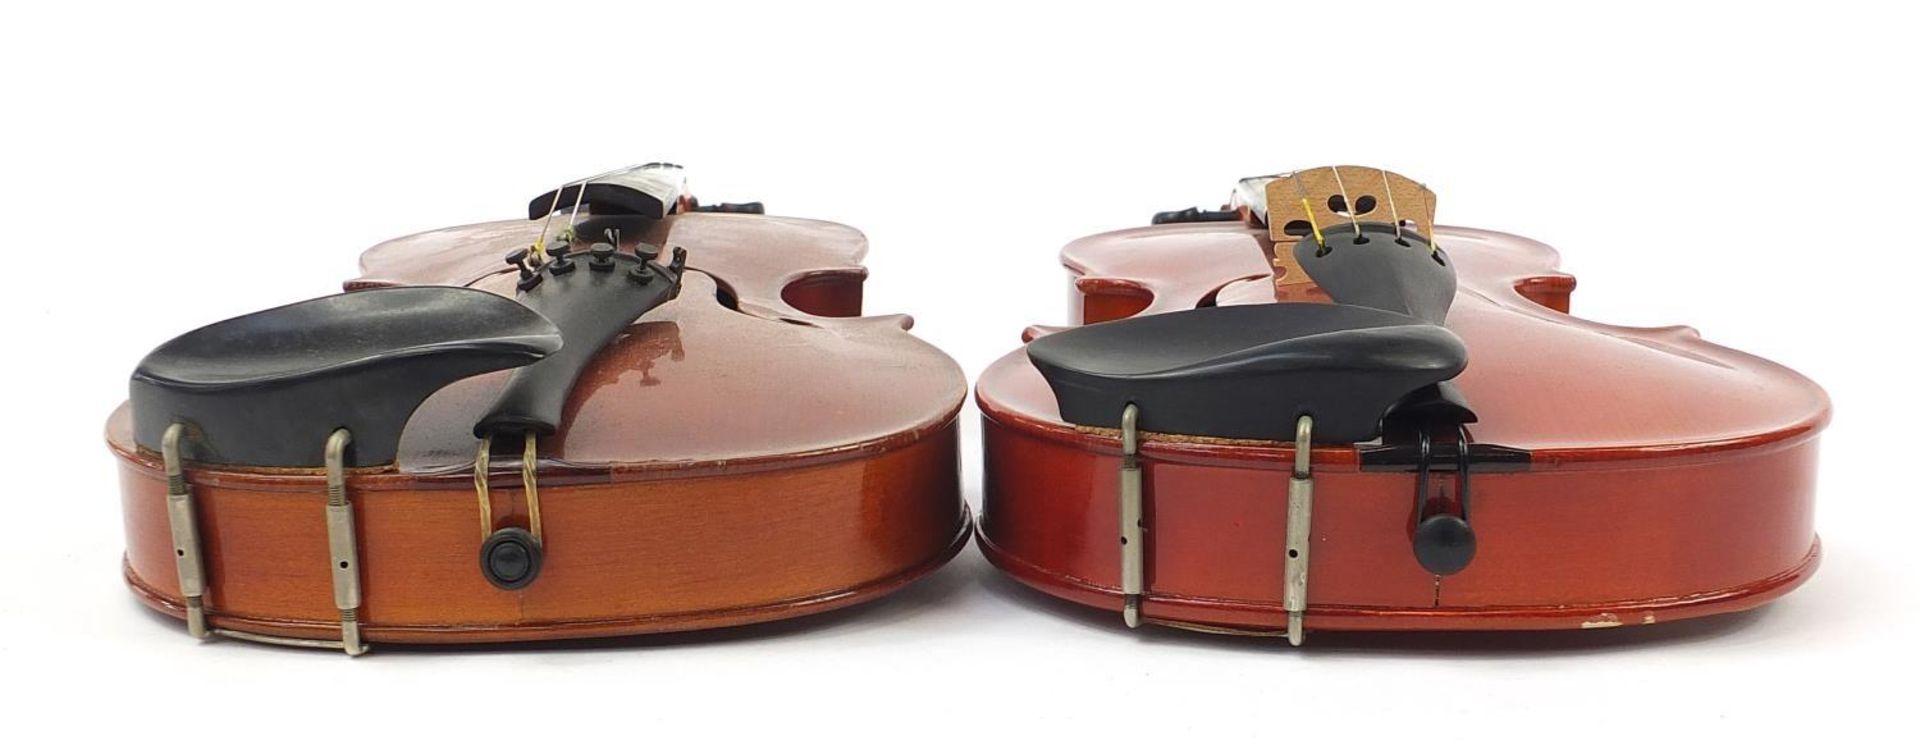 Two violins with cases - Image 6 of 13